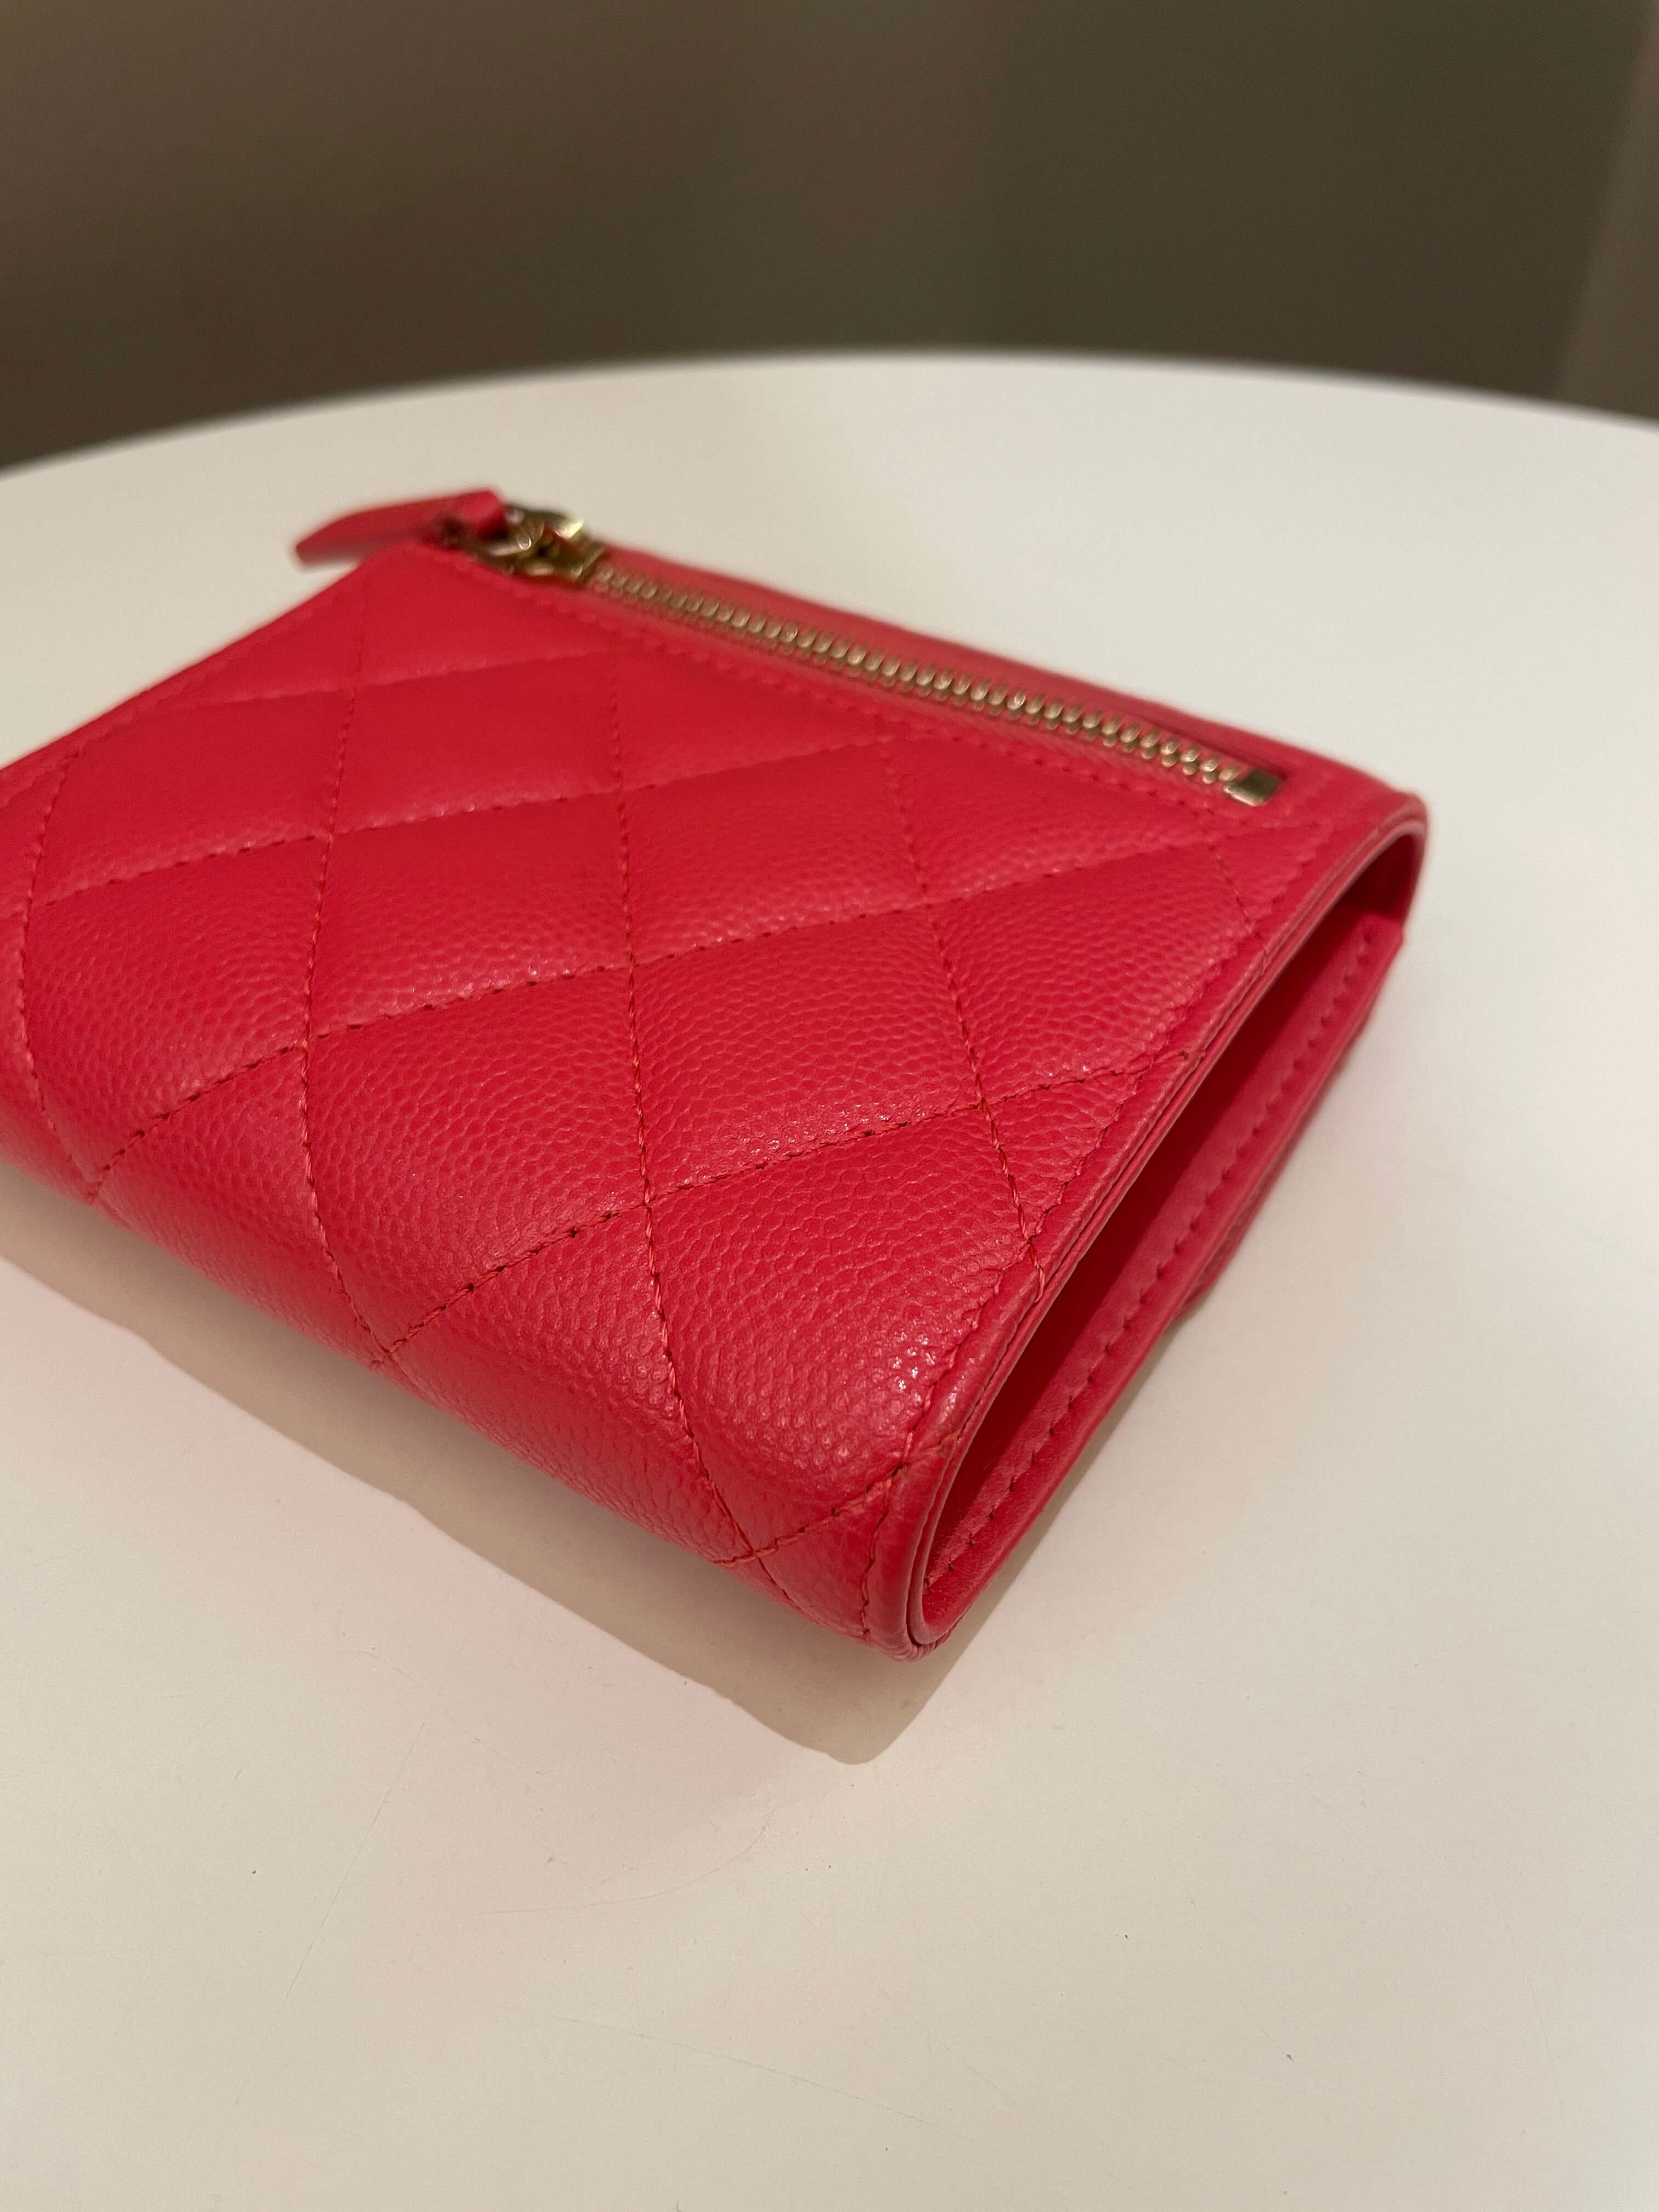 Chanel Classic Quilted Tri Fold Compact Wallet
Coral Red Caviar